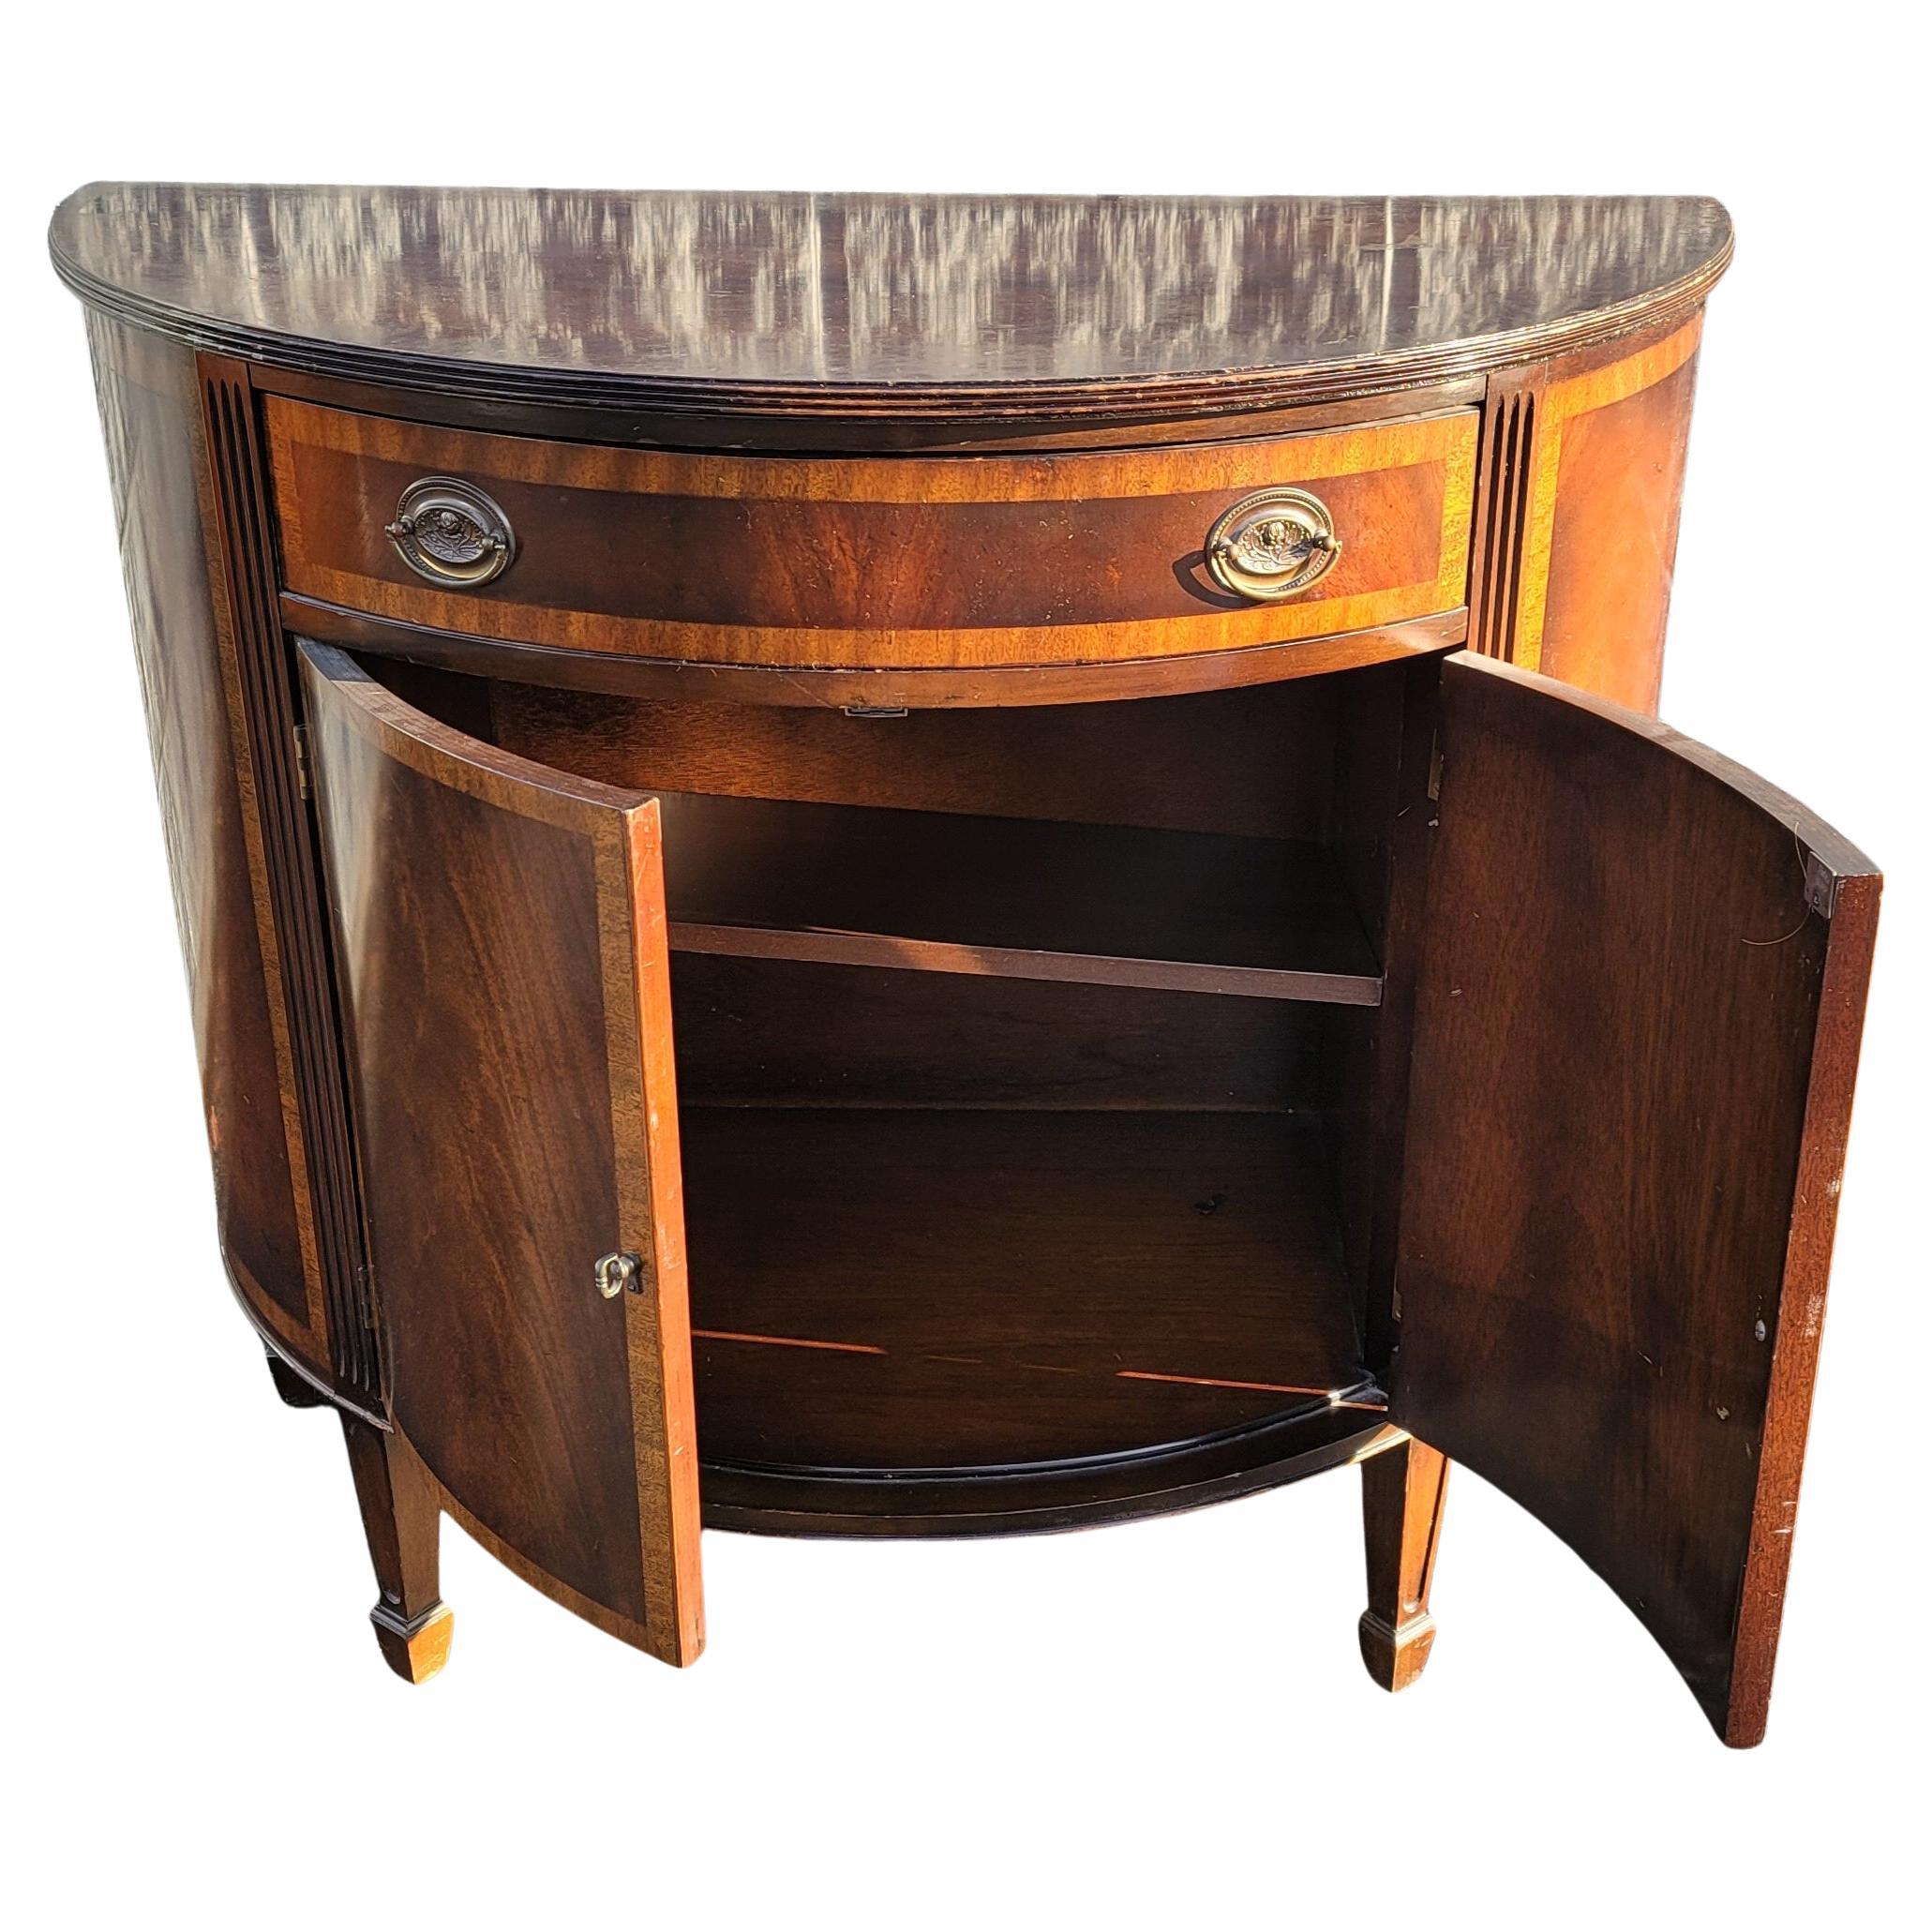 Mid-19th Centruty George III Demilune Banded Flame Mahogany Commodes Cabinets 1